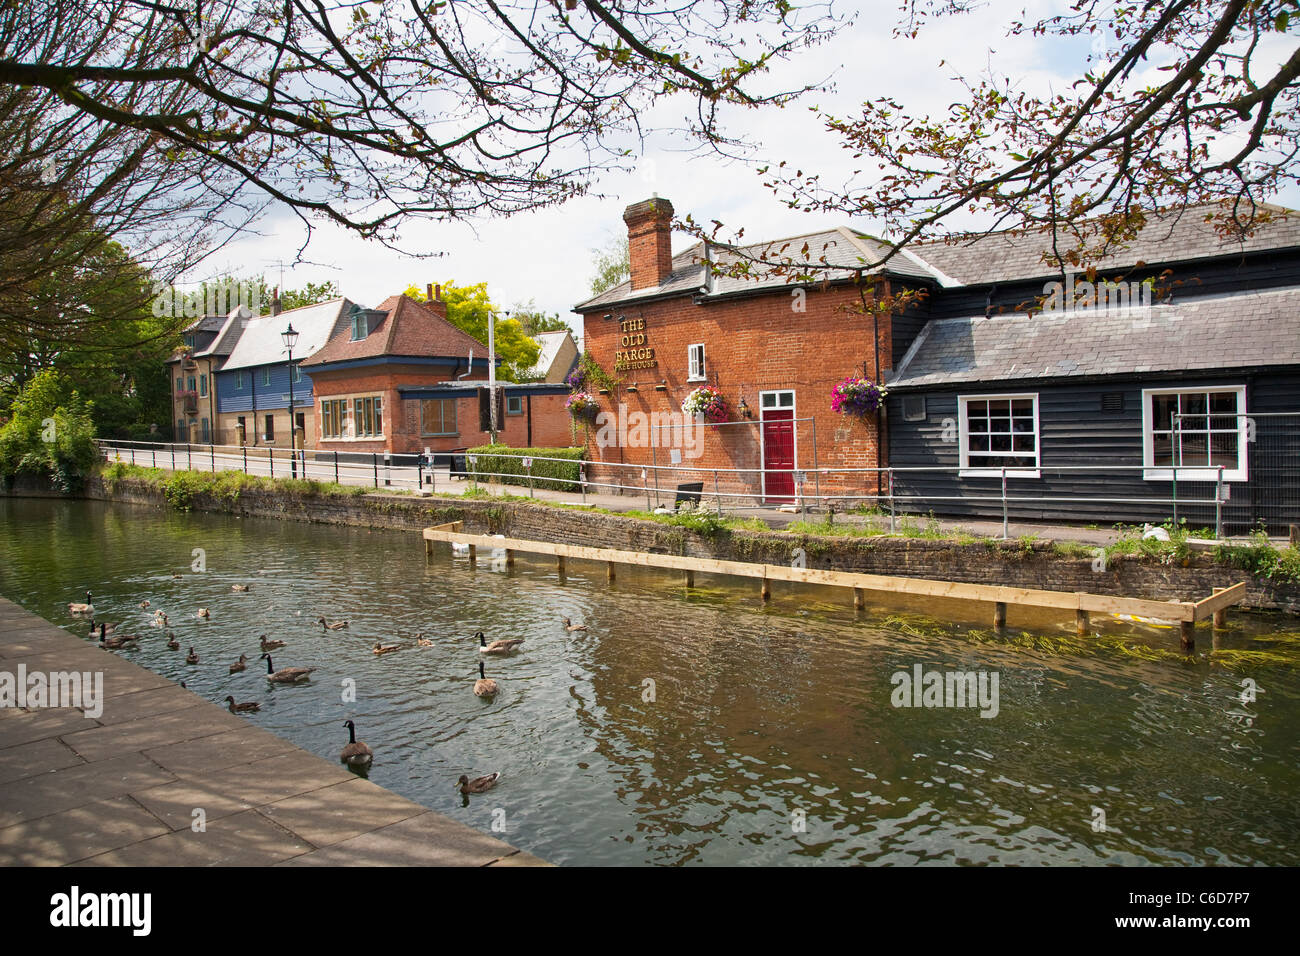 The Old Barge public house in Hertford. Stock Photo